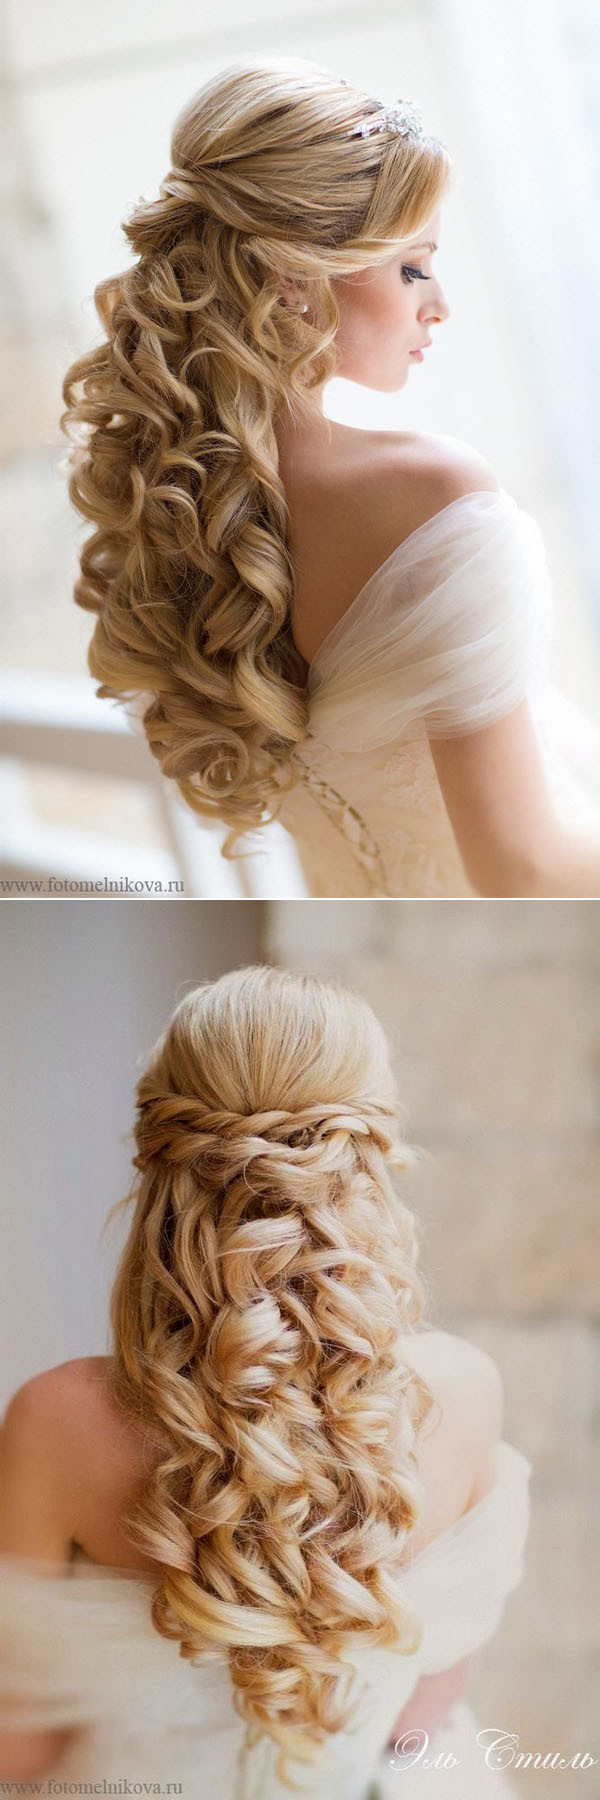 Down Wedding Hairstyles For Long Hair
 20 Awesome Half Up Half Down Wedding Hairstyle Ideas